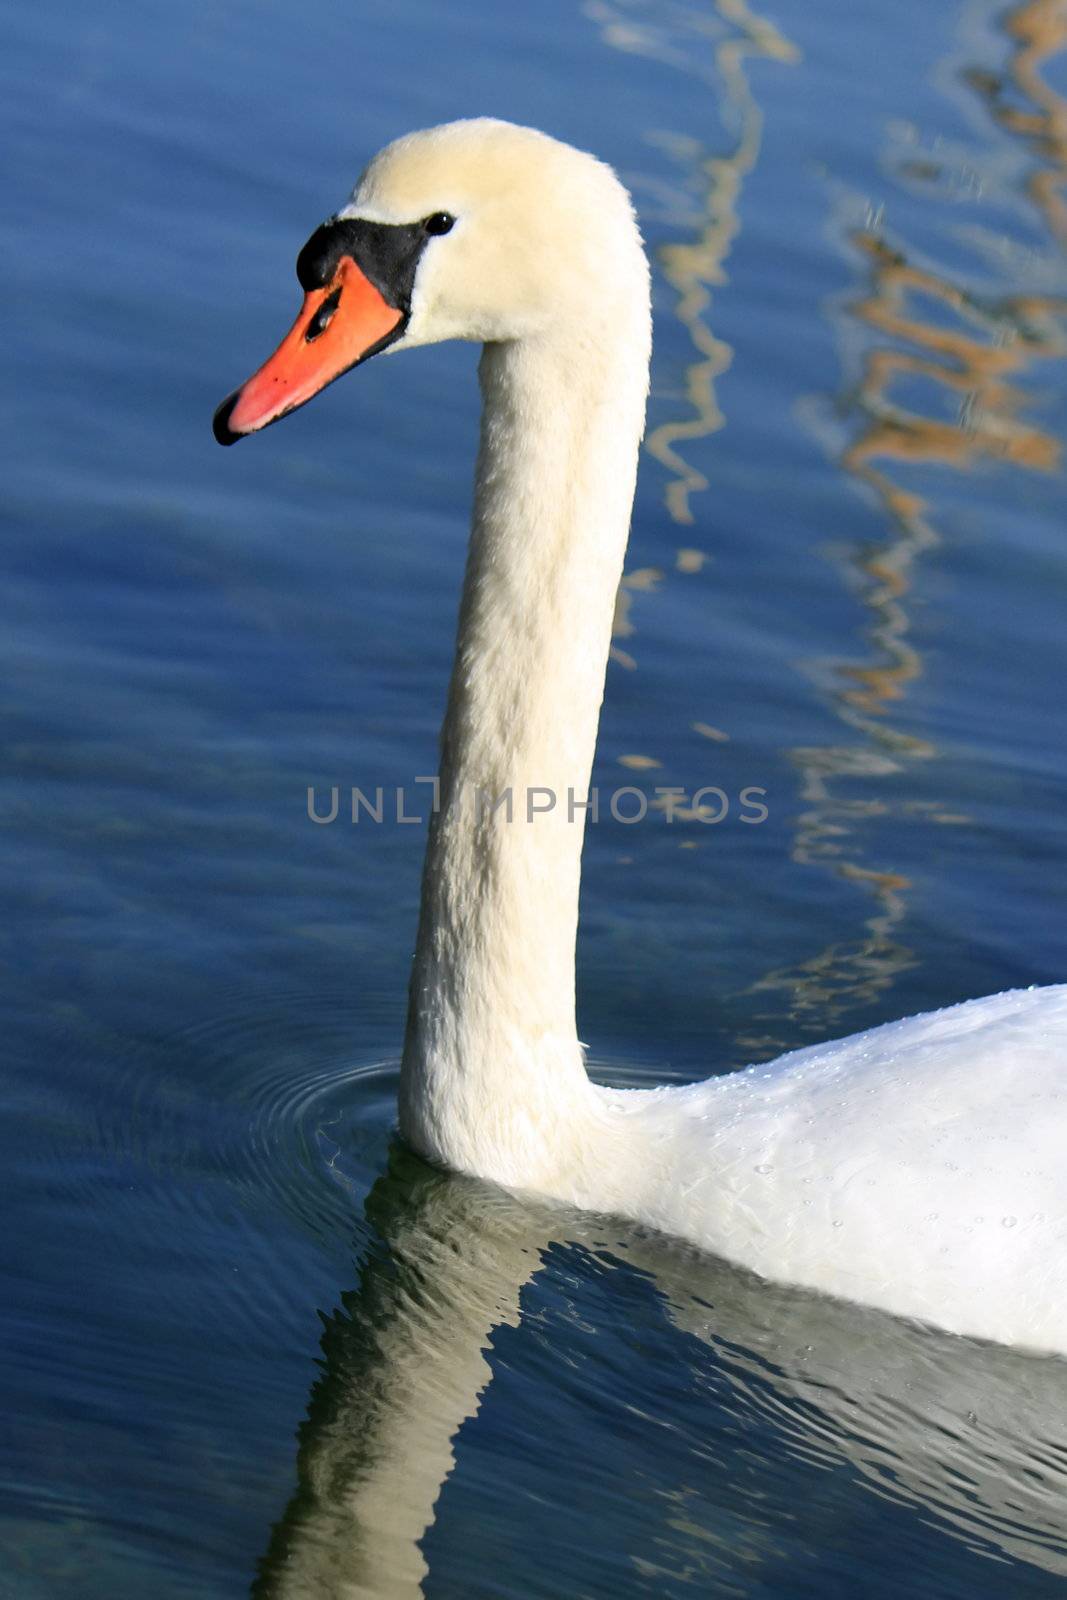 Beautiful white swan with long neck floating on the water while looking at the photographer